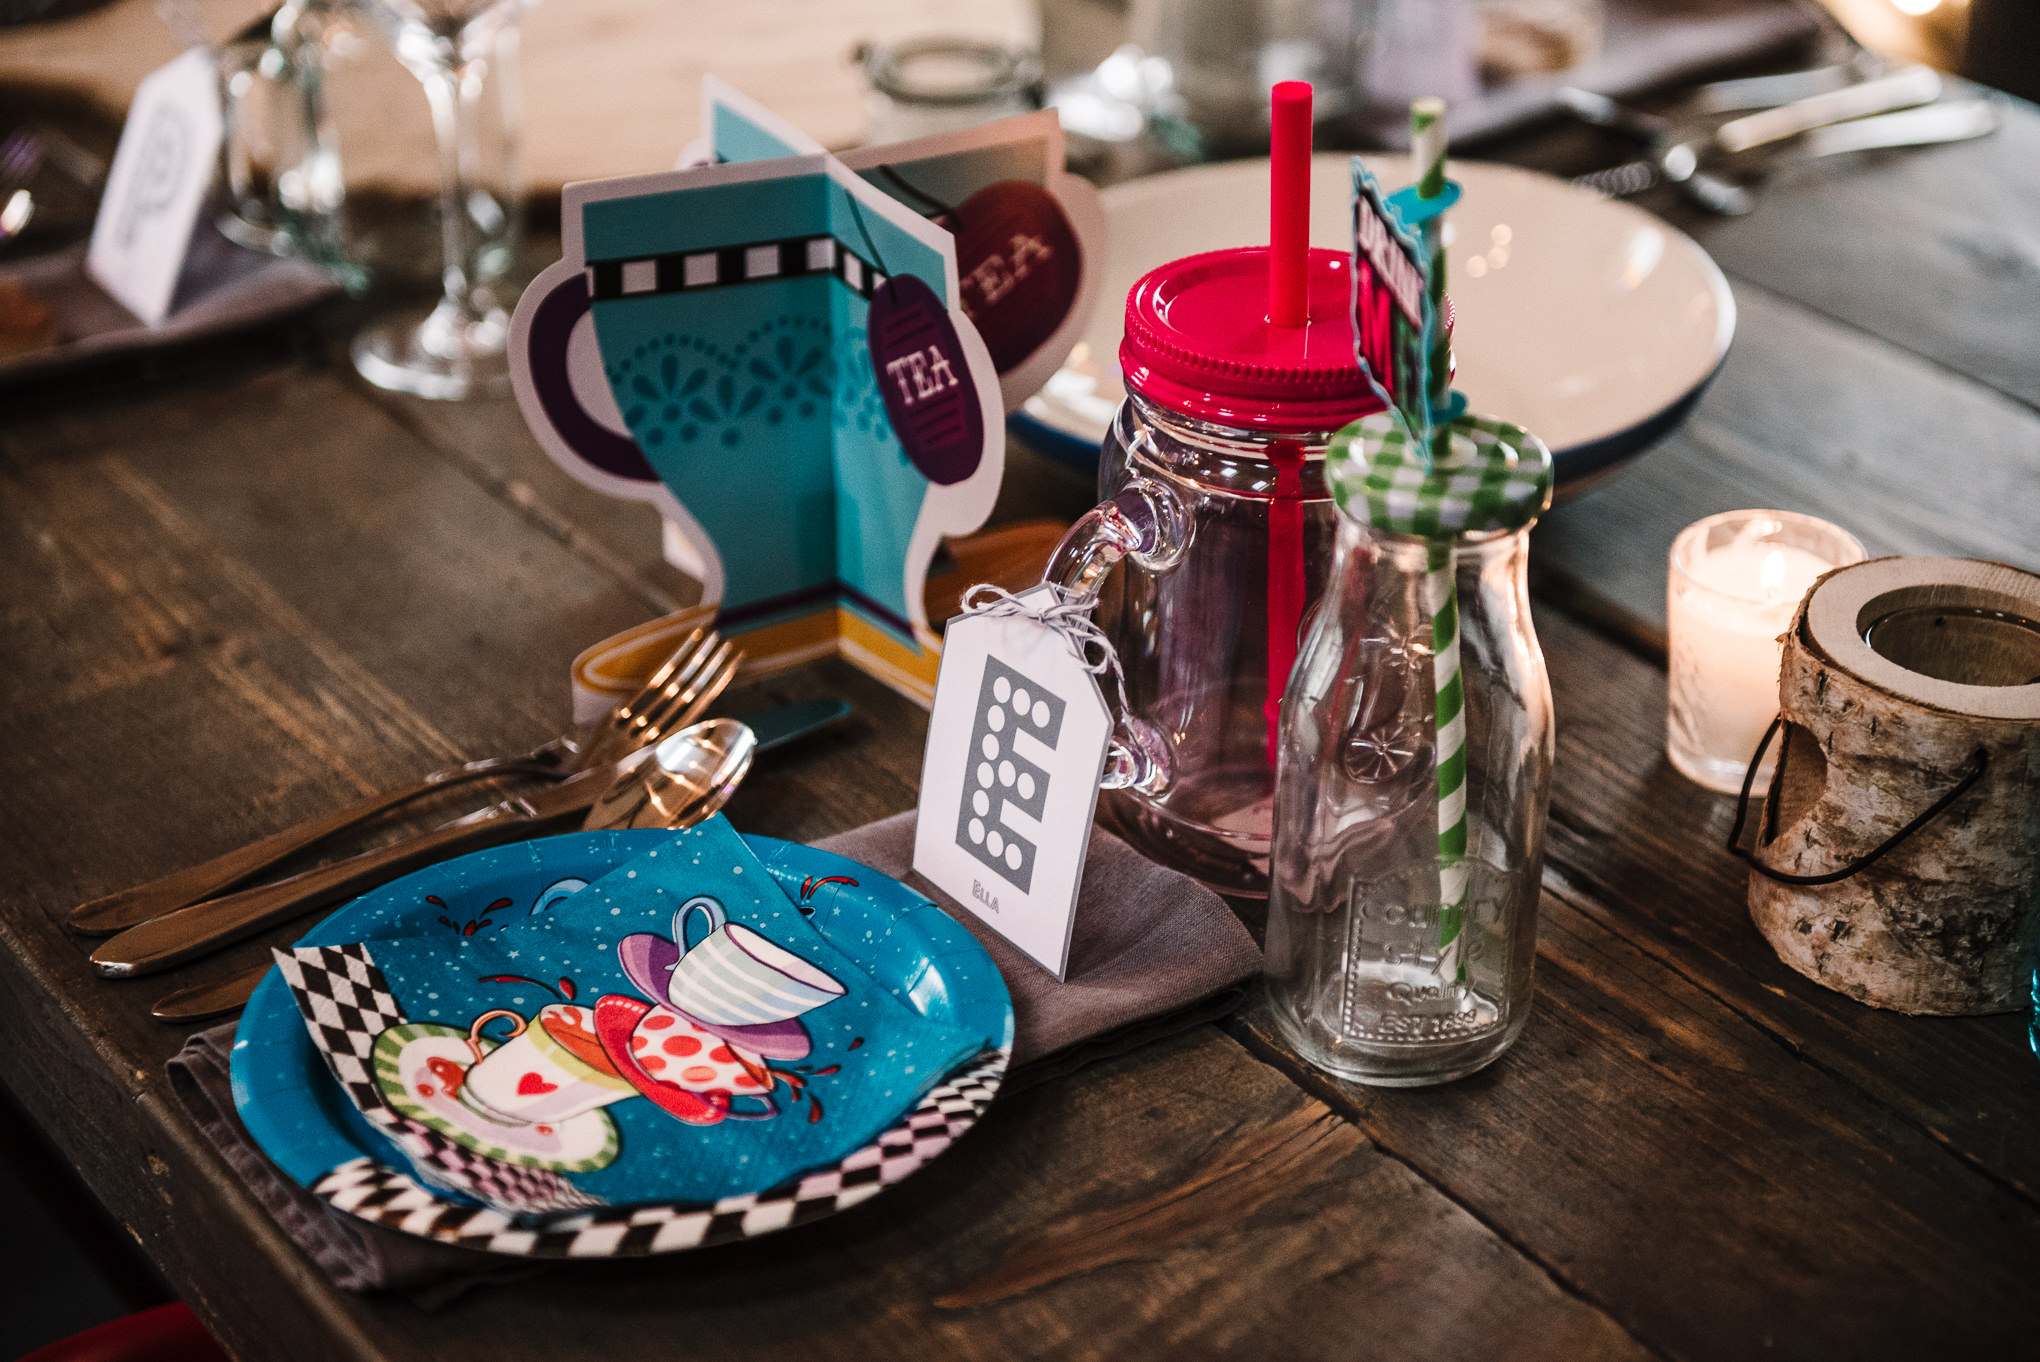 Mad Hatters Tea Party place setting